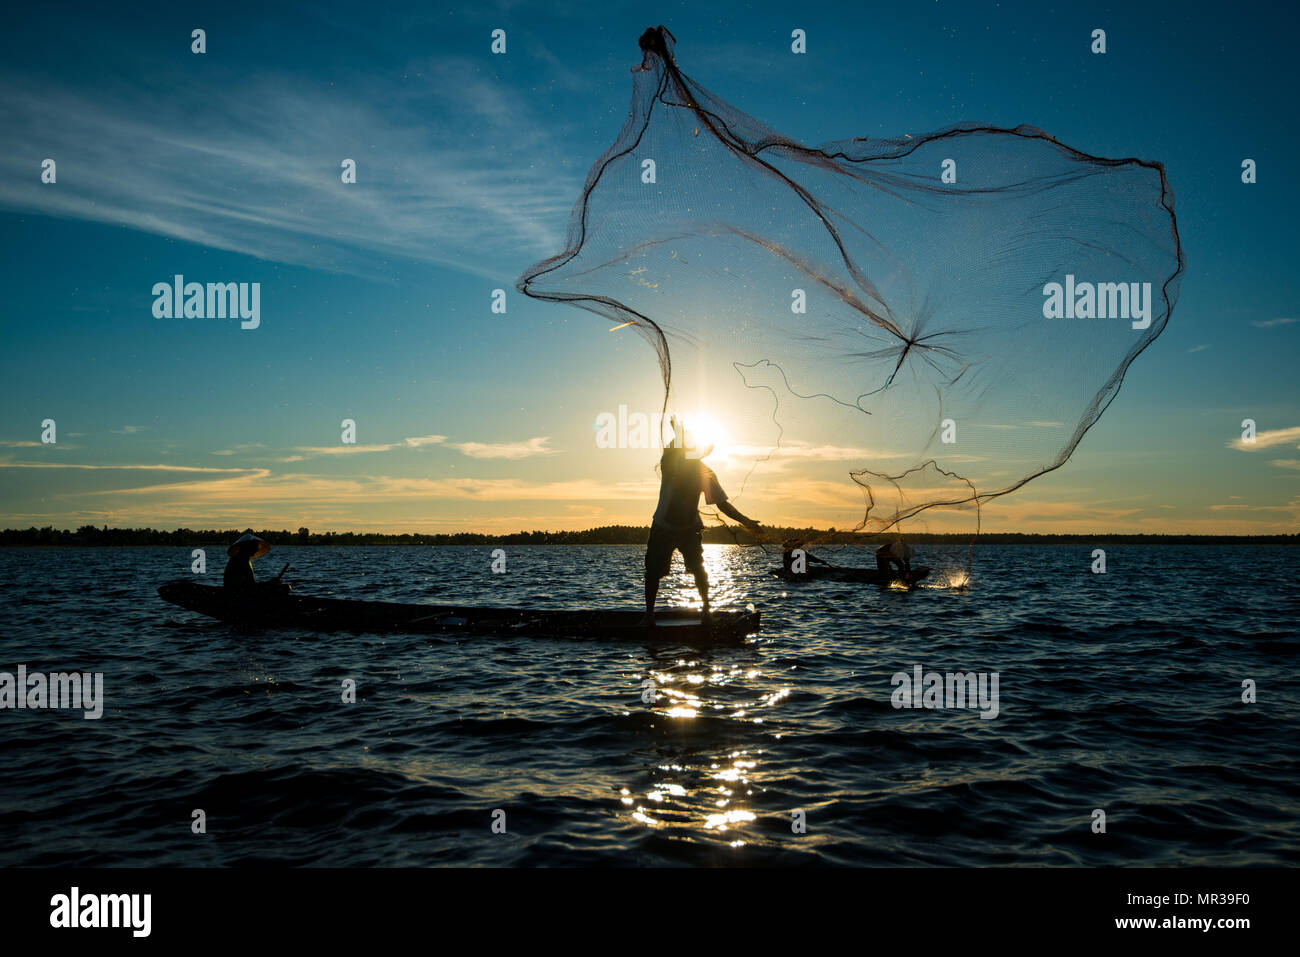 Un-identified silhouette fisher man on boat fishing by throwing fishing net to river during sunset in rural of Thailand Stock Photo